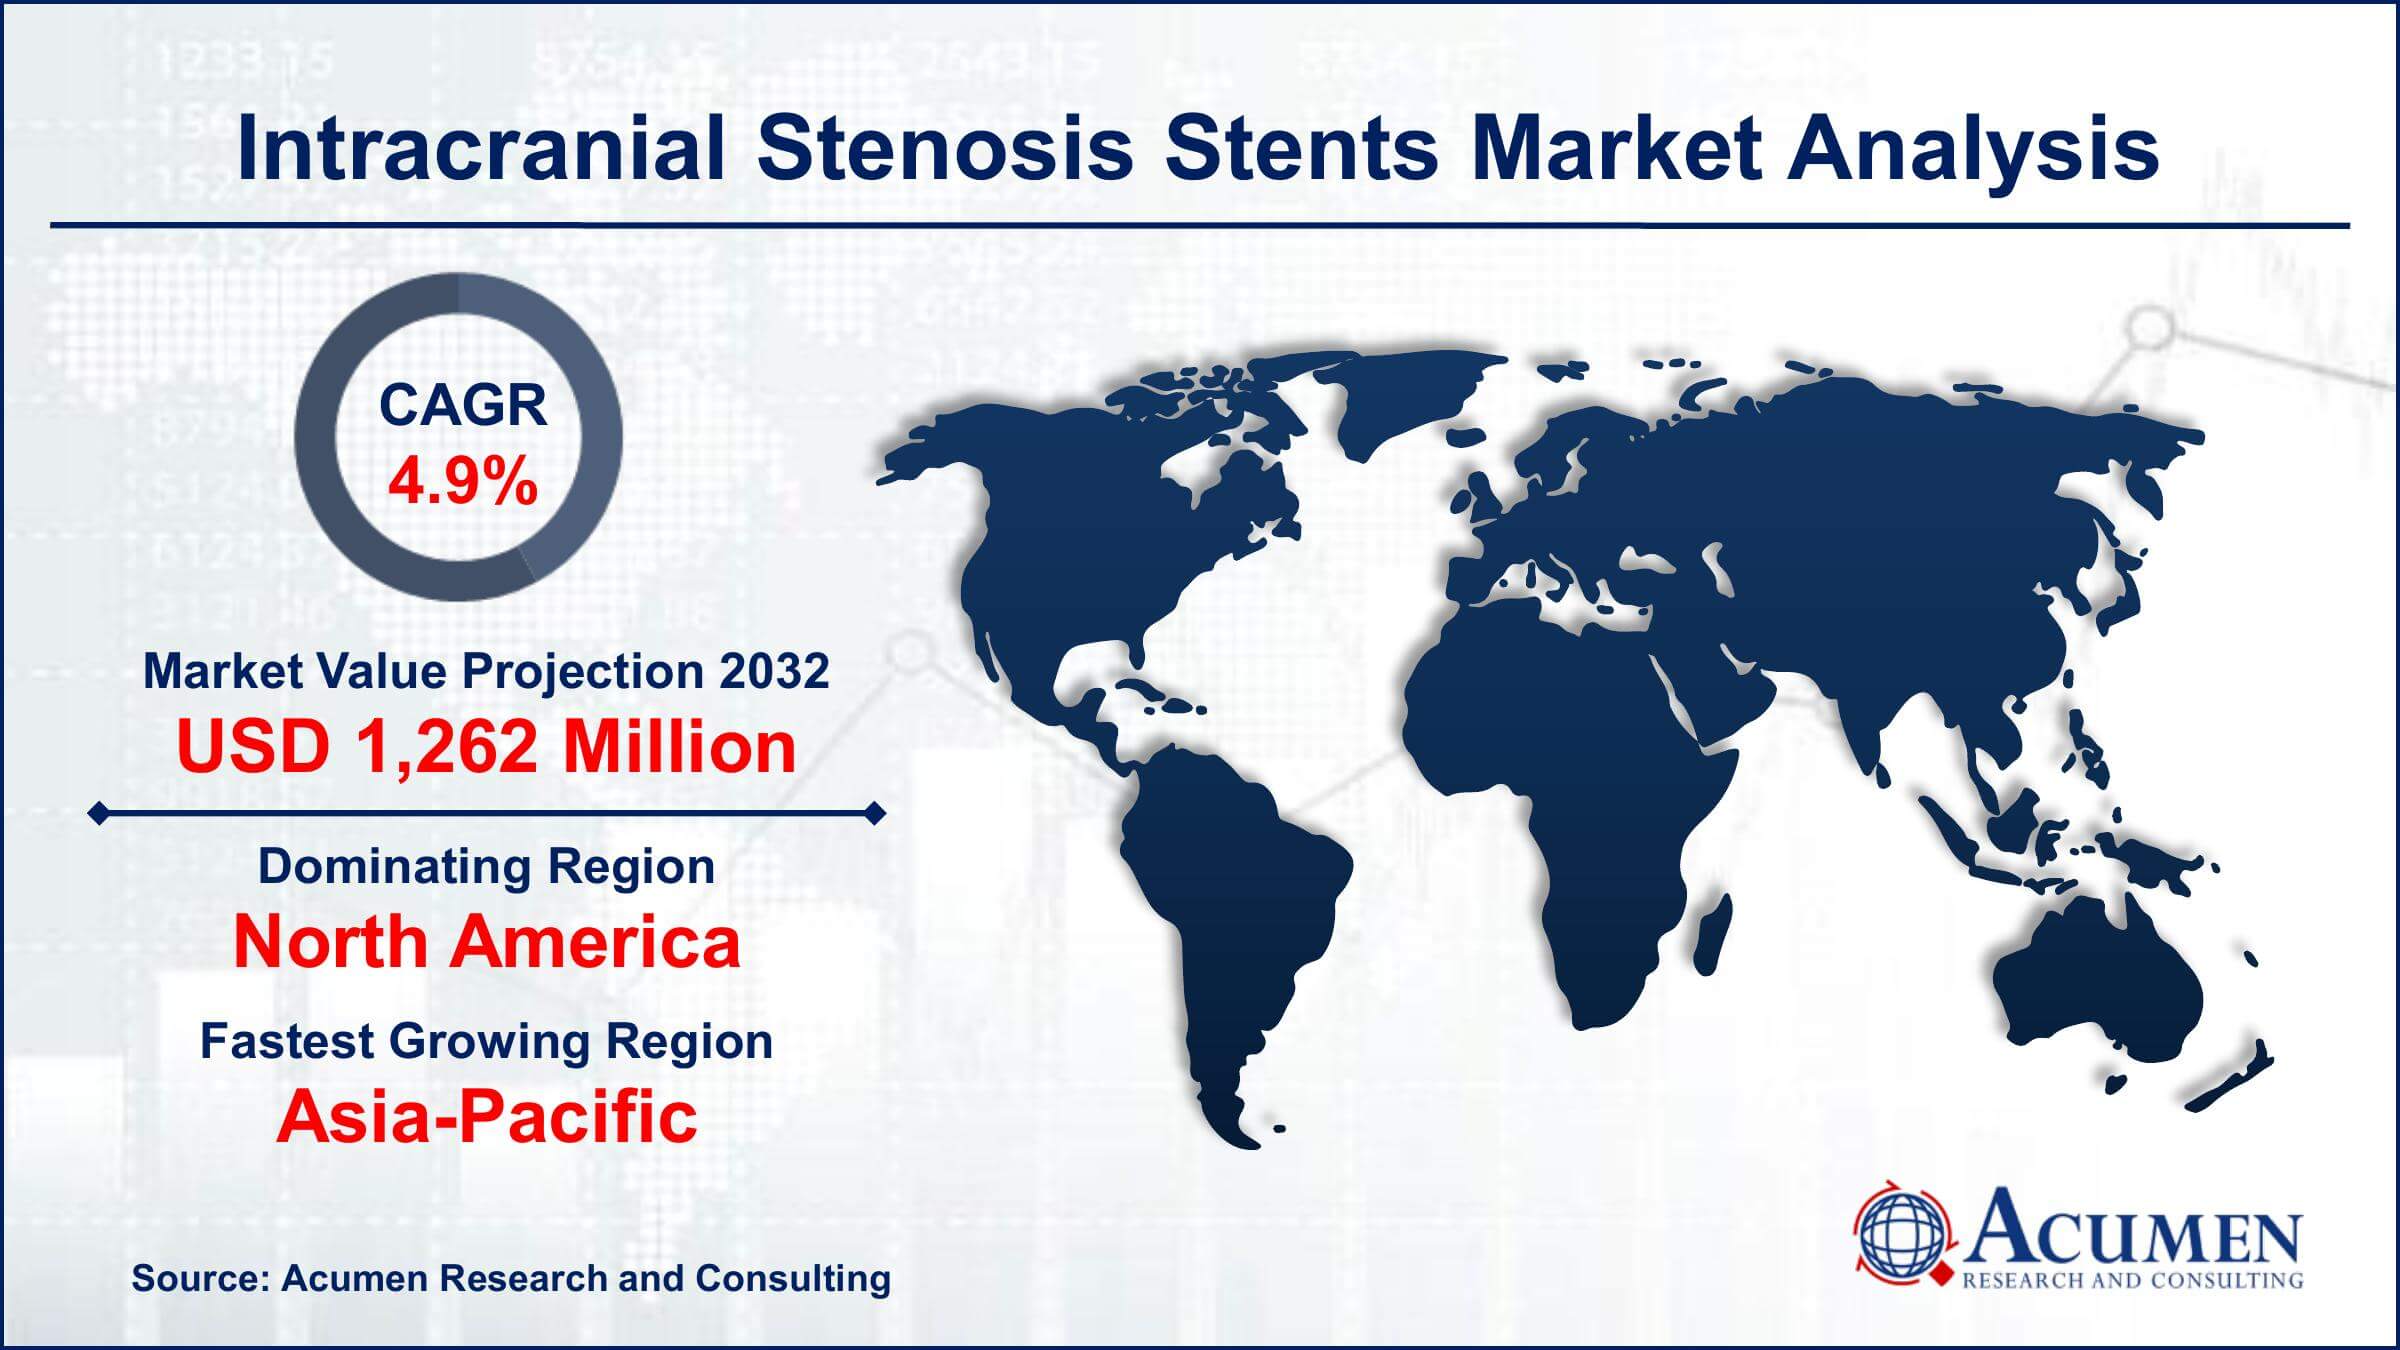 Intracranial Stenosis Stents Market Trends